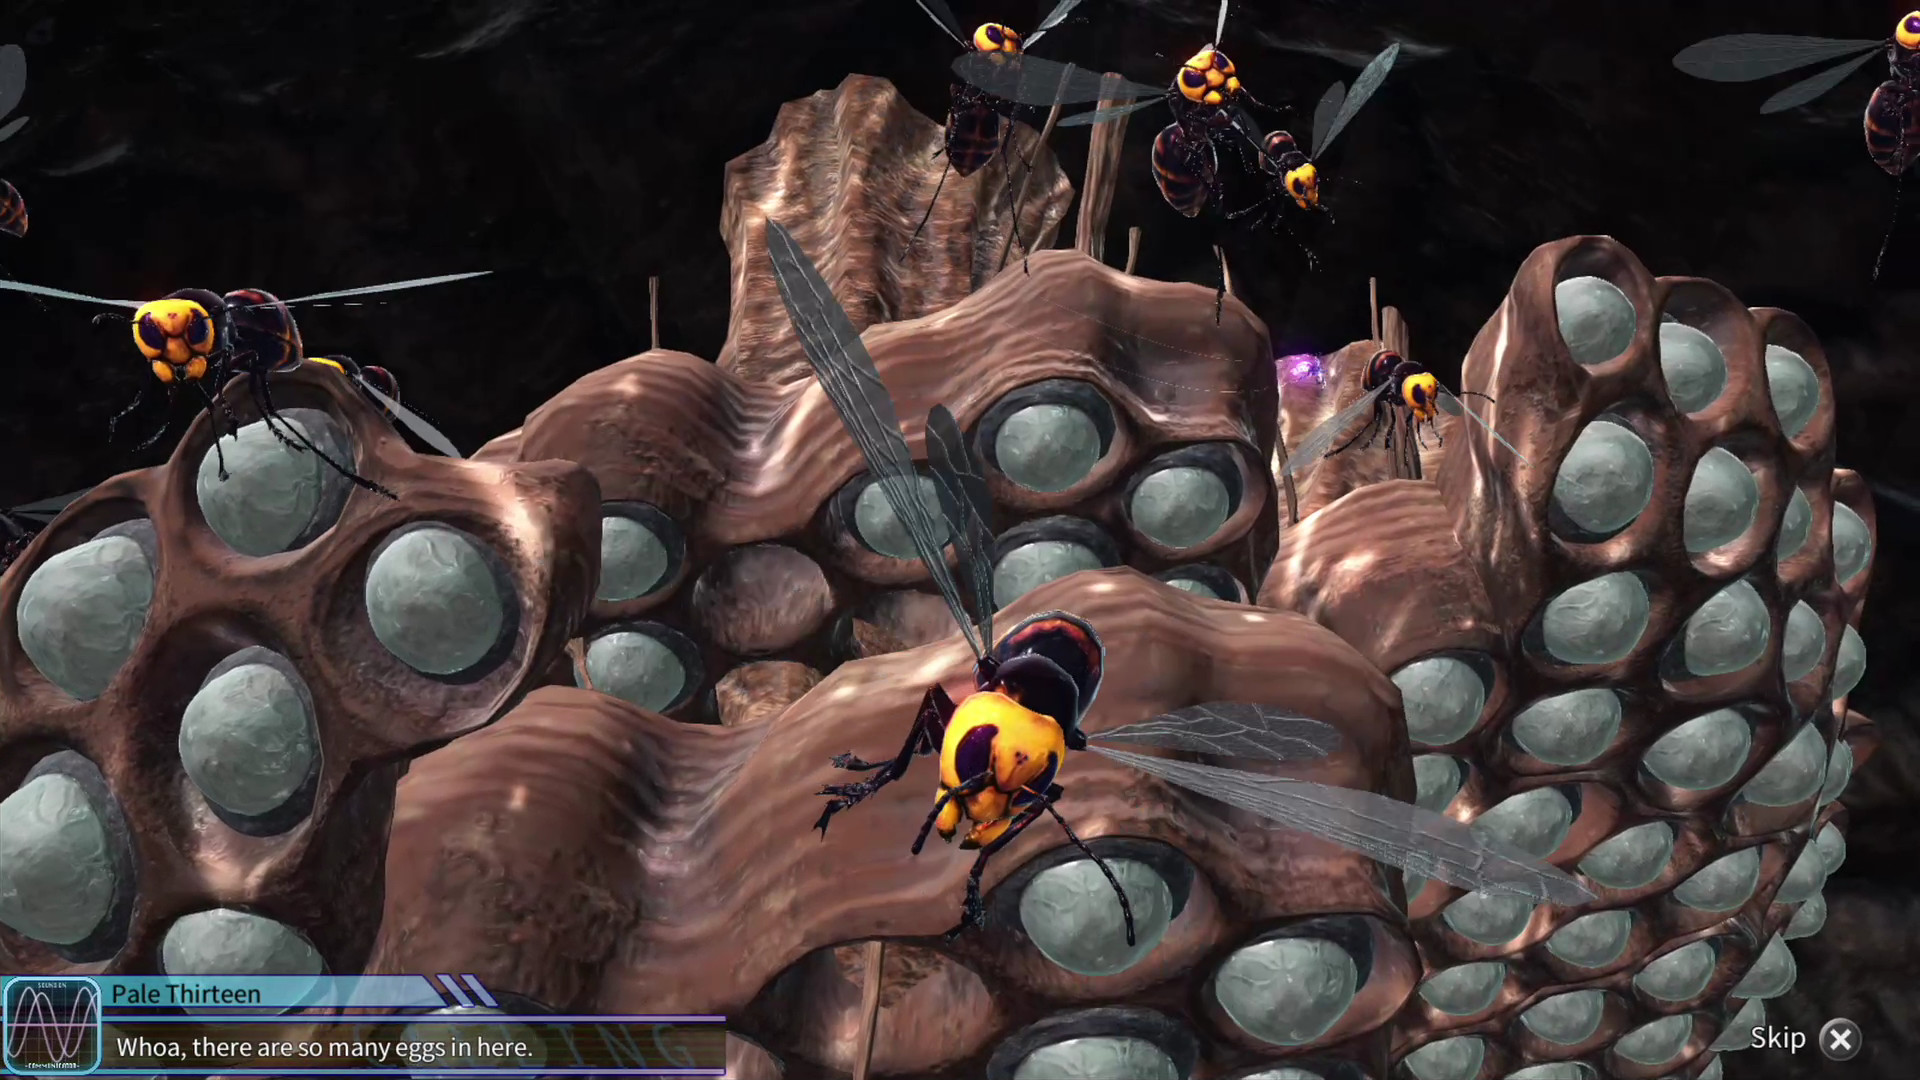 EARTH DEFENSE FORCE 4.1 WINGDIVER THE SHOOTER screenshot